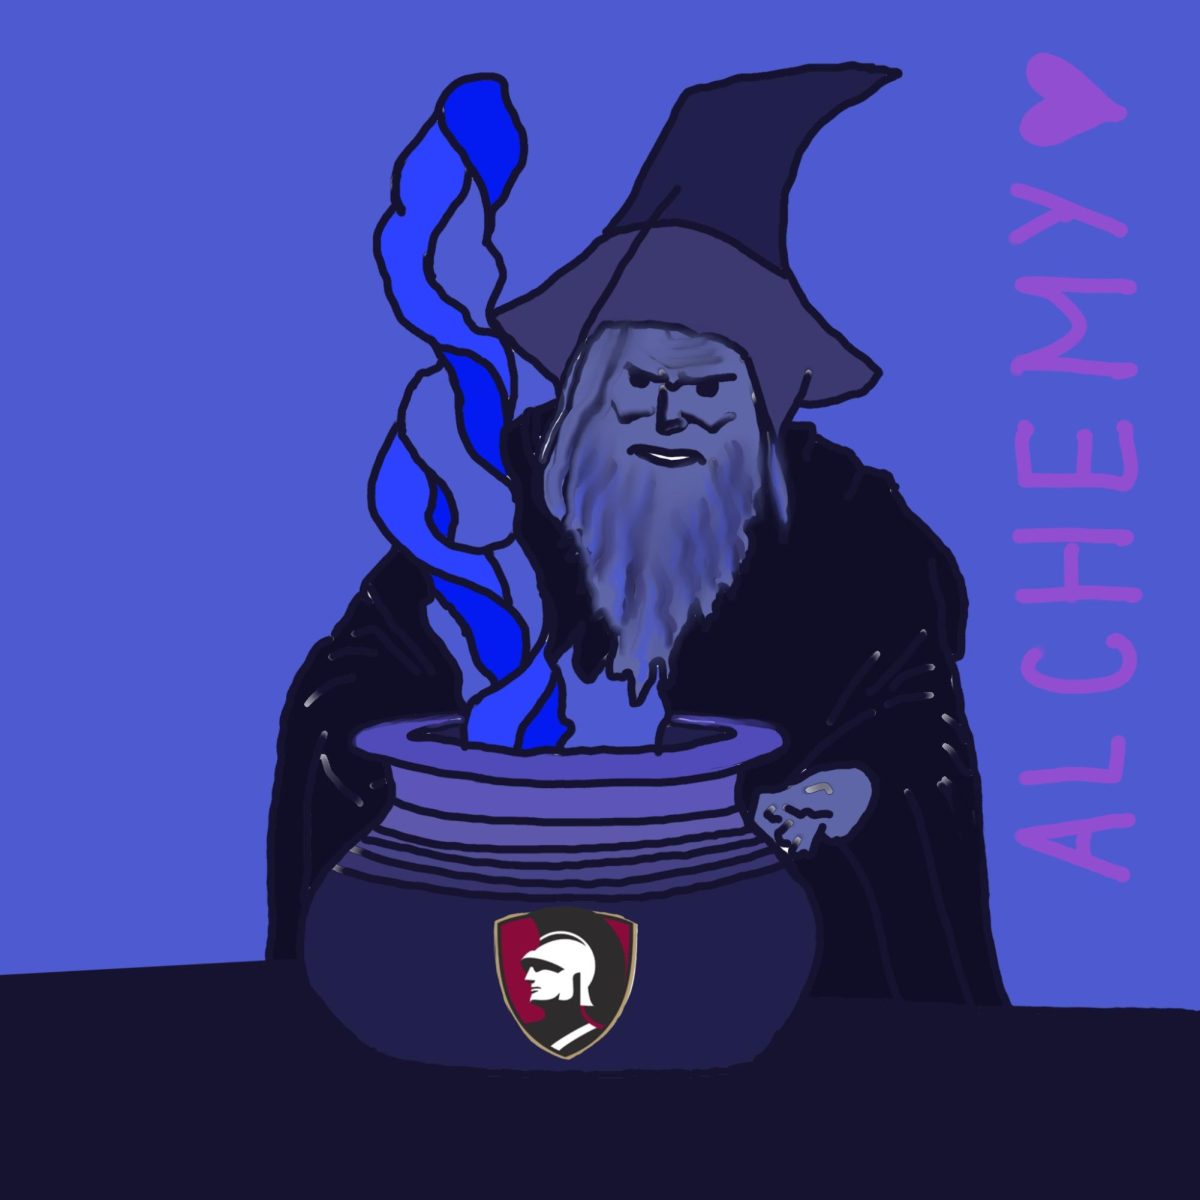 An alchemist in dark robes stirs a pot with a Westmont crest on the front.